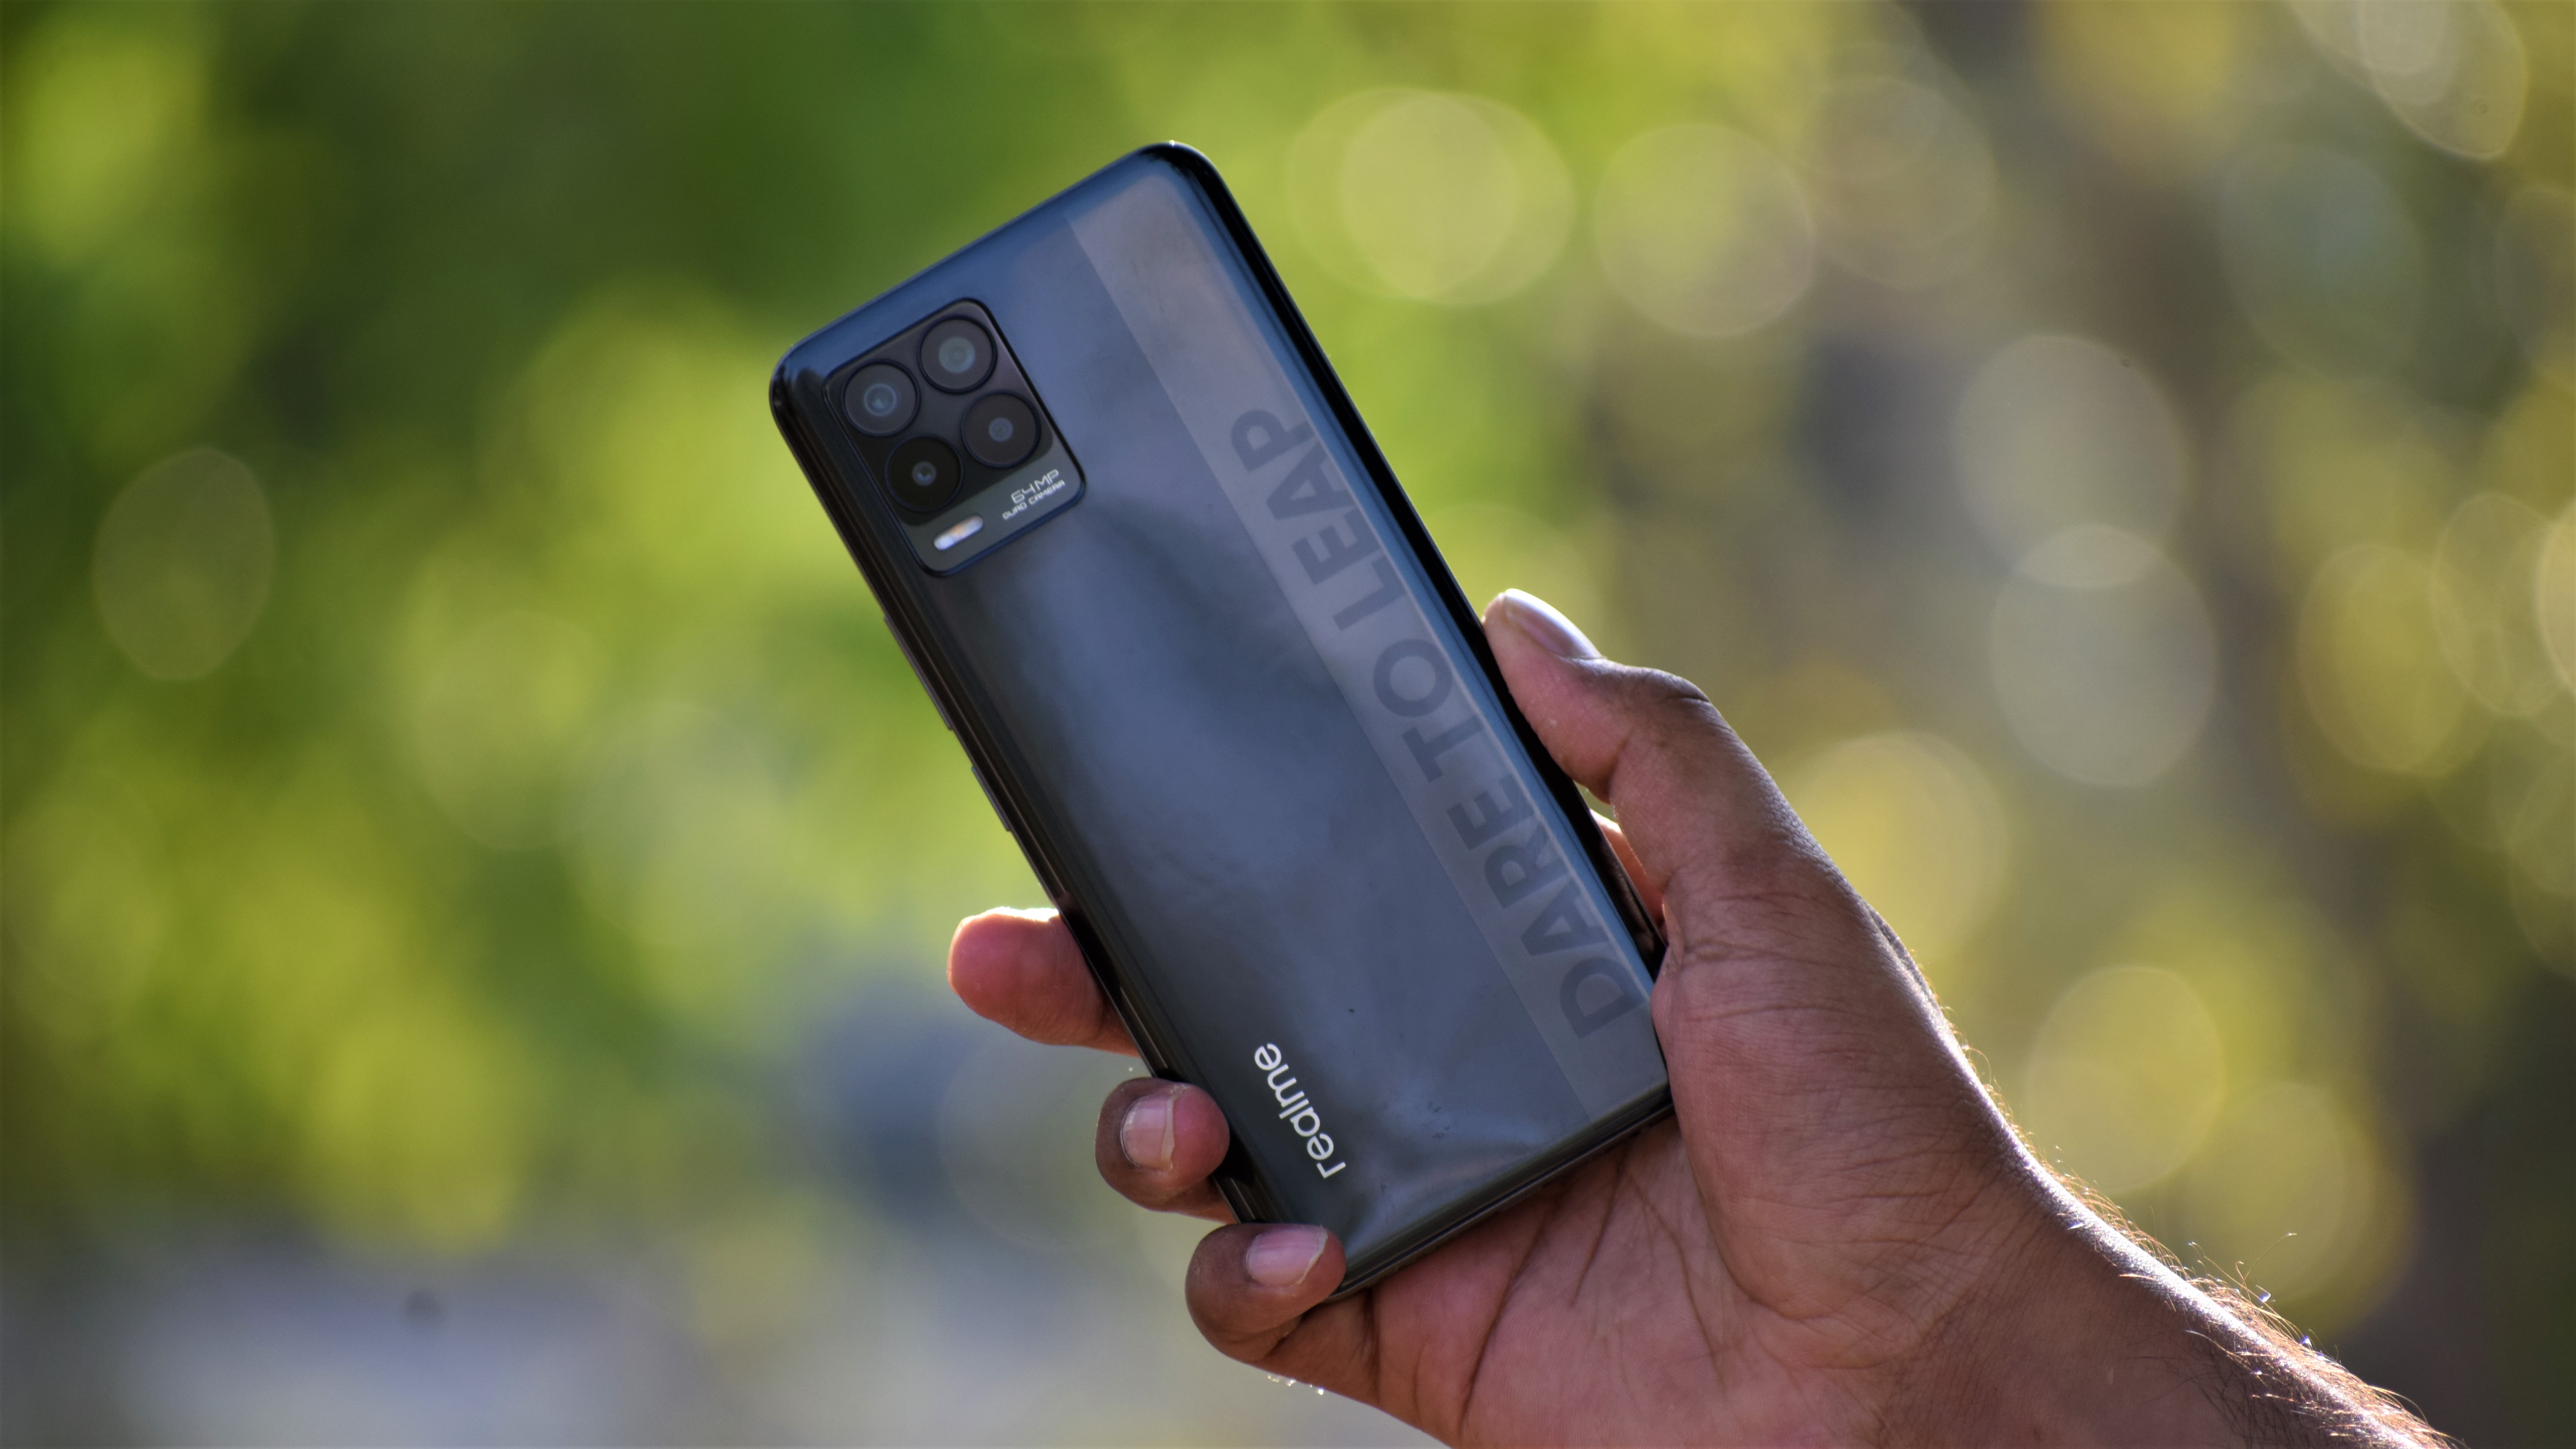 Realme 8 5G review: a budget phone with decent specs